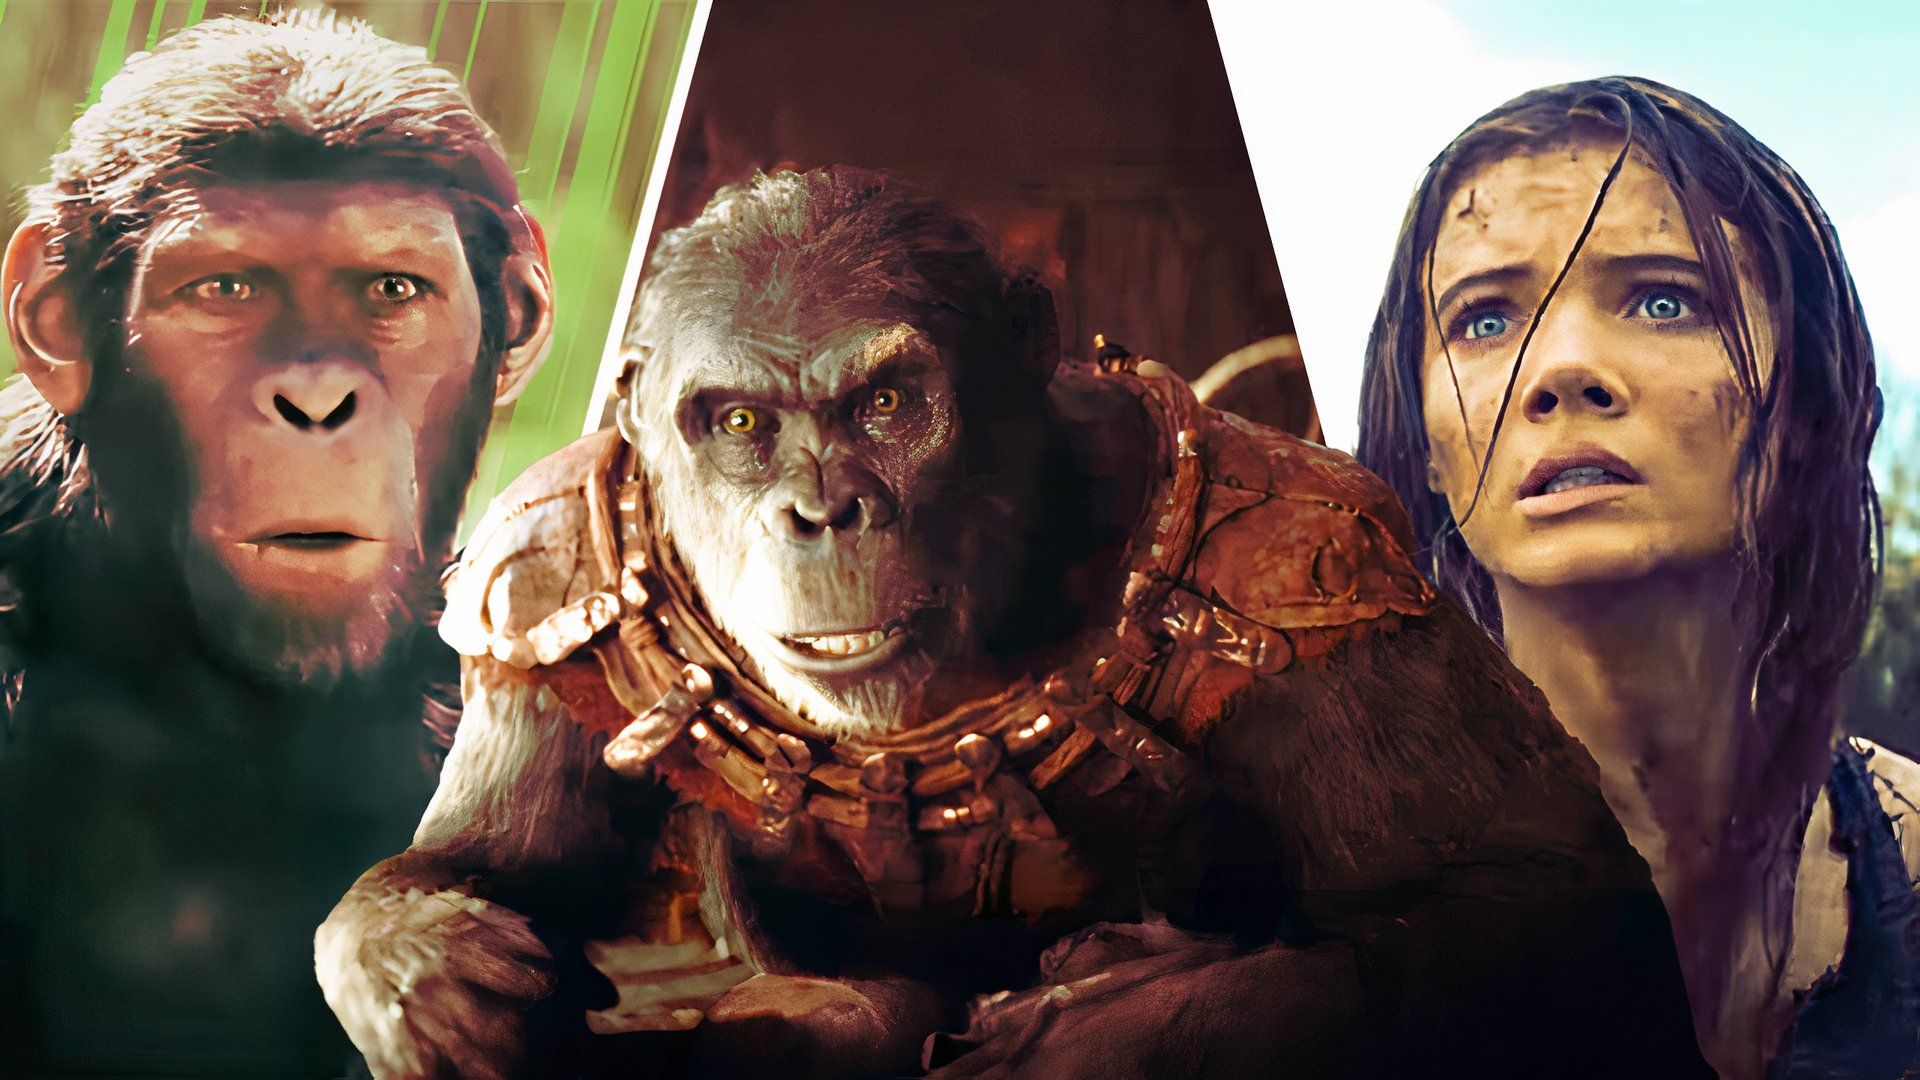 An edited image of Proximus, Noa, and Mae in Kingdom of the Planet of the Apes